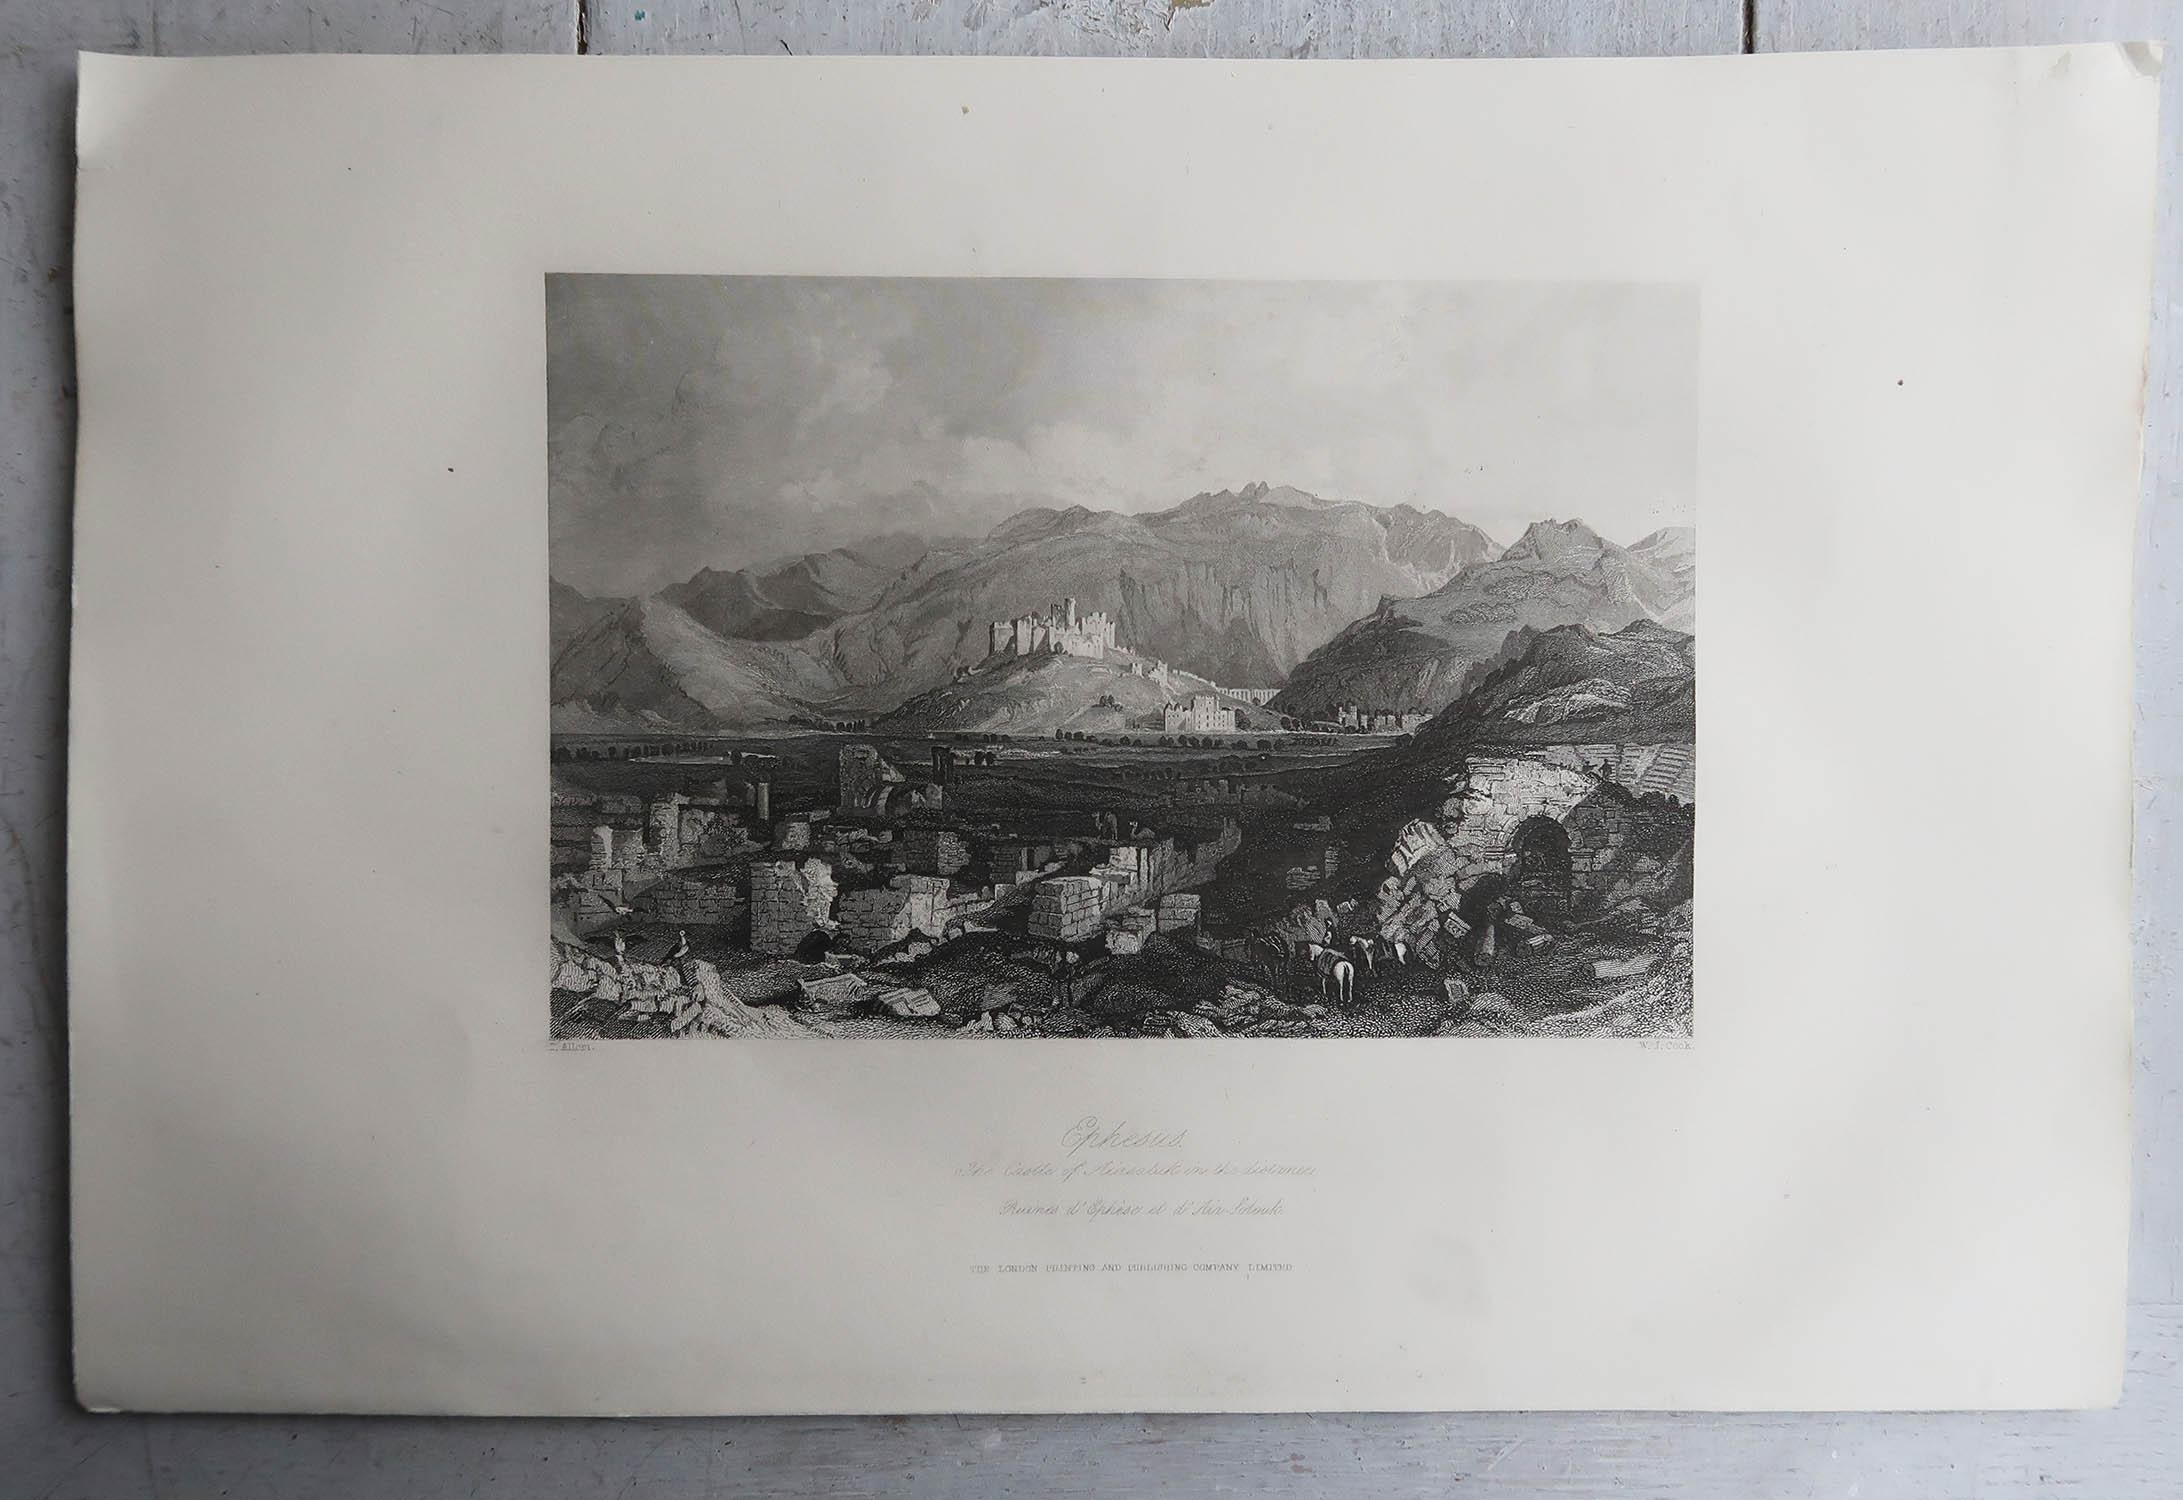 Wonderful set of 9 prints of the Middle East

Steel engravings after Thomas Allom

Published by The London Printing And Publishing Co.

Unframed.

The measurement below is the paper size.





